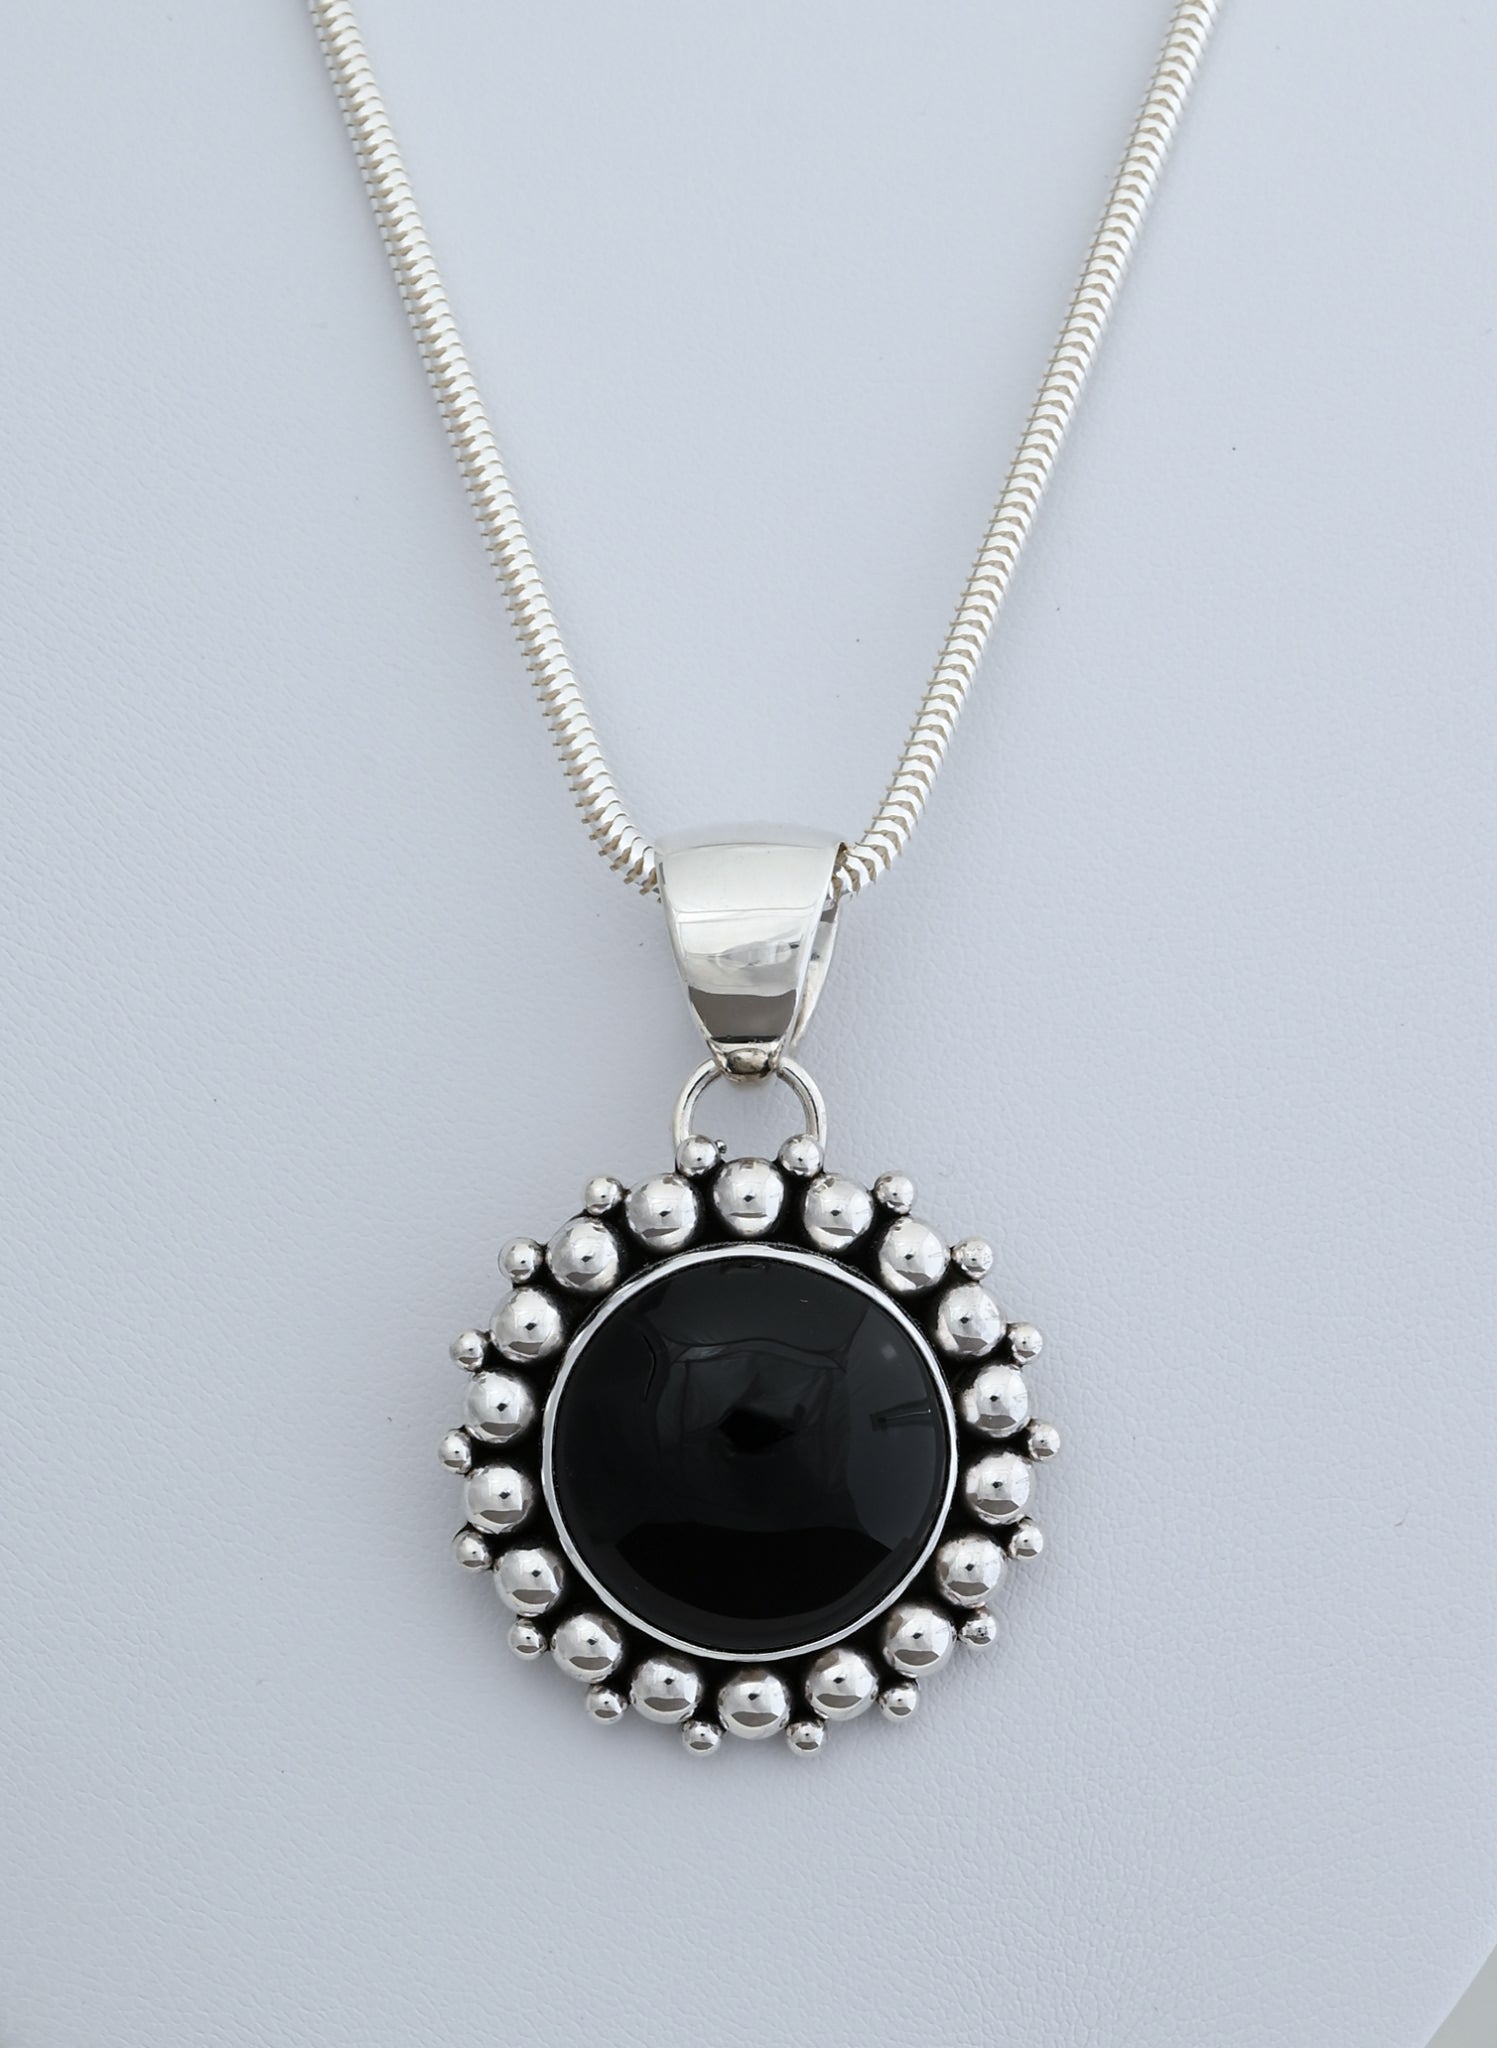 Pendant with Black Onyx by Artie Yellowhorse